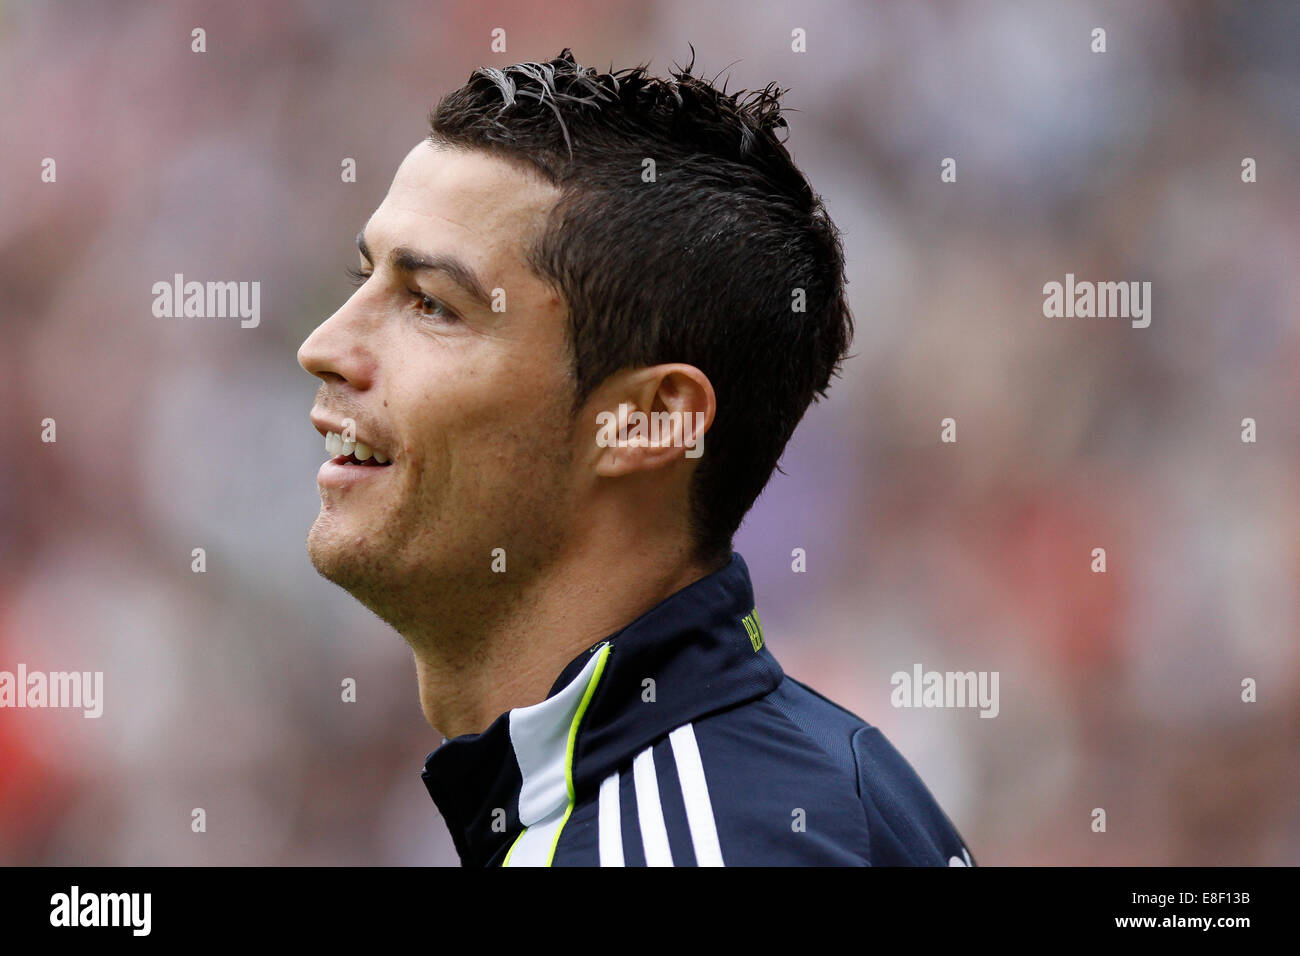 CRISTIANO RONALDO, REAL MADRID, football, DVD Banque D'Images